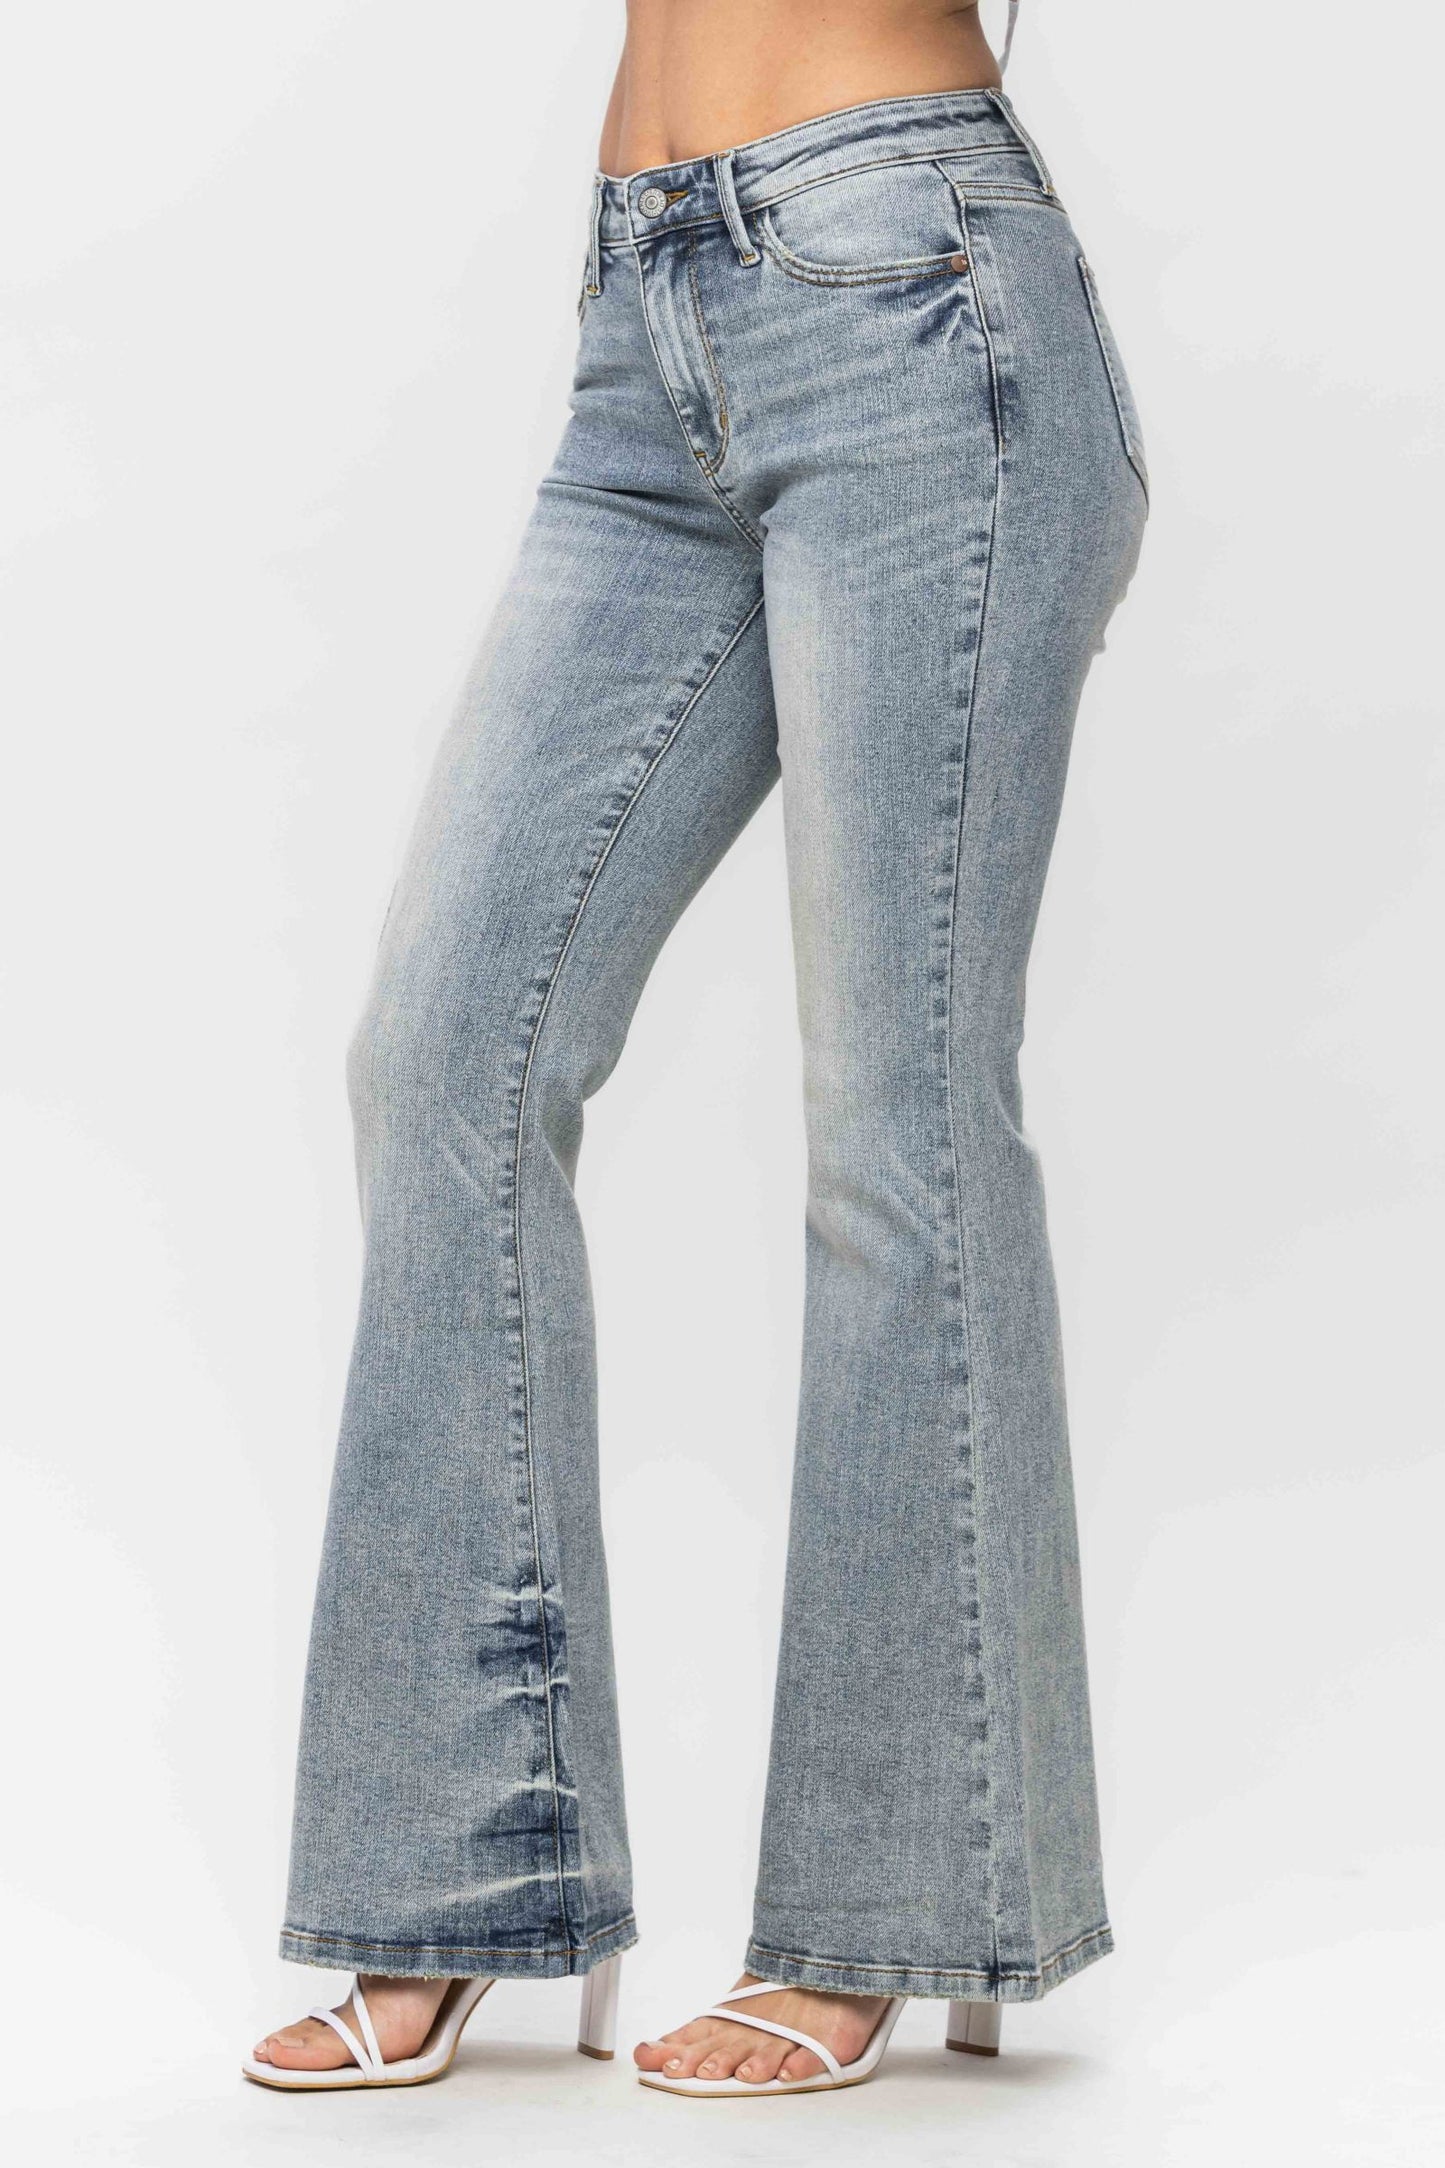 Judy Blue Mid-Rise Tinted Pin Tack Flare Denim Jeans